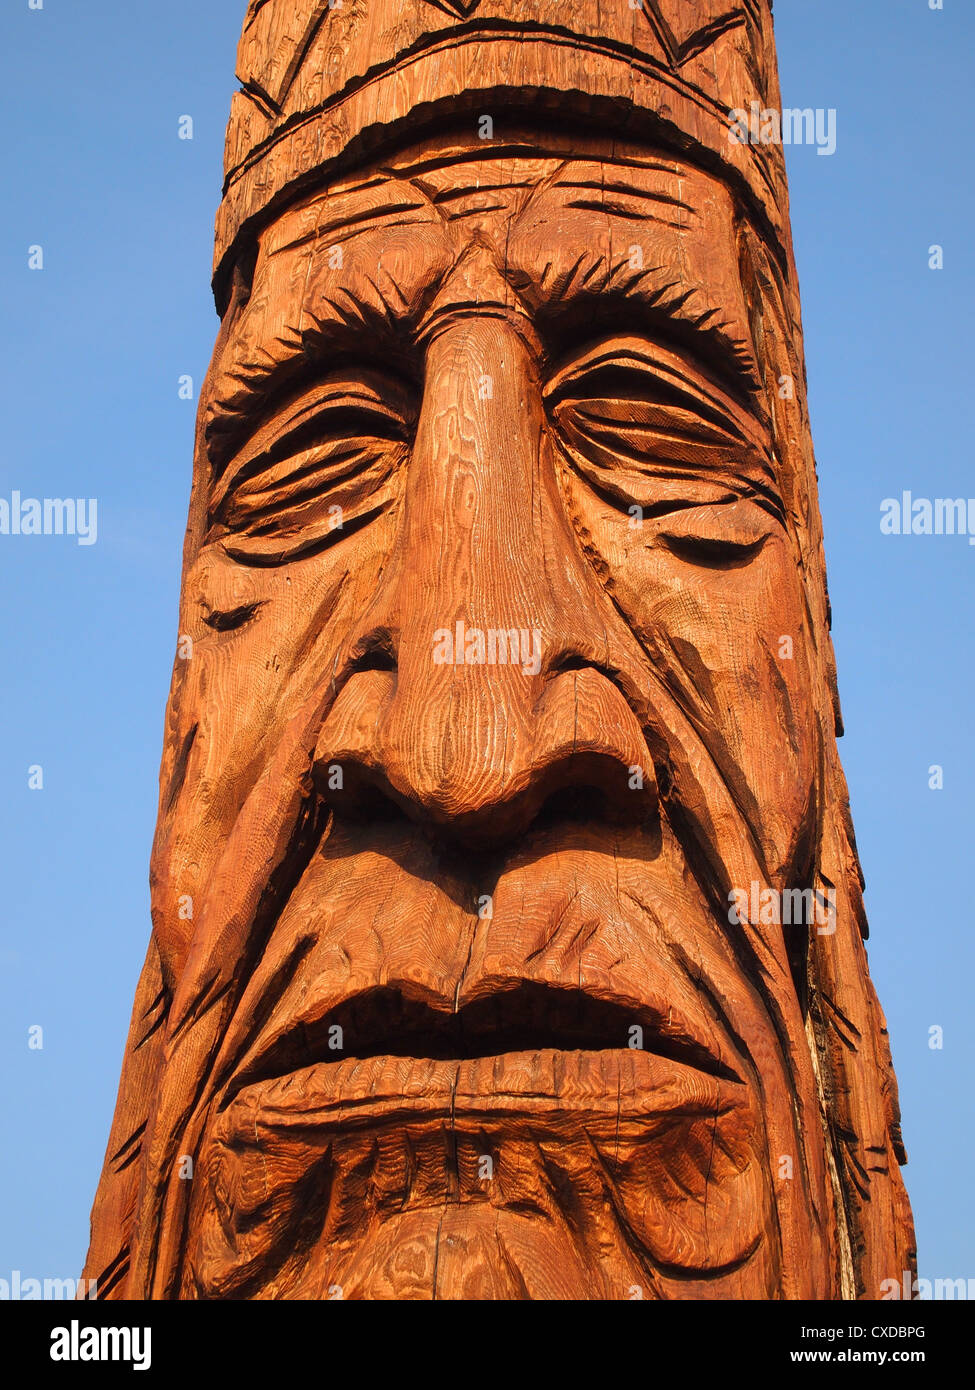 Detail of a totem pole in Bethany Beach, DE on August 14, 2012. The pole was designed by sculptor Peter Wolf Toth. Stock Photo